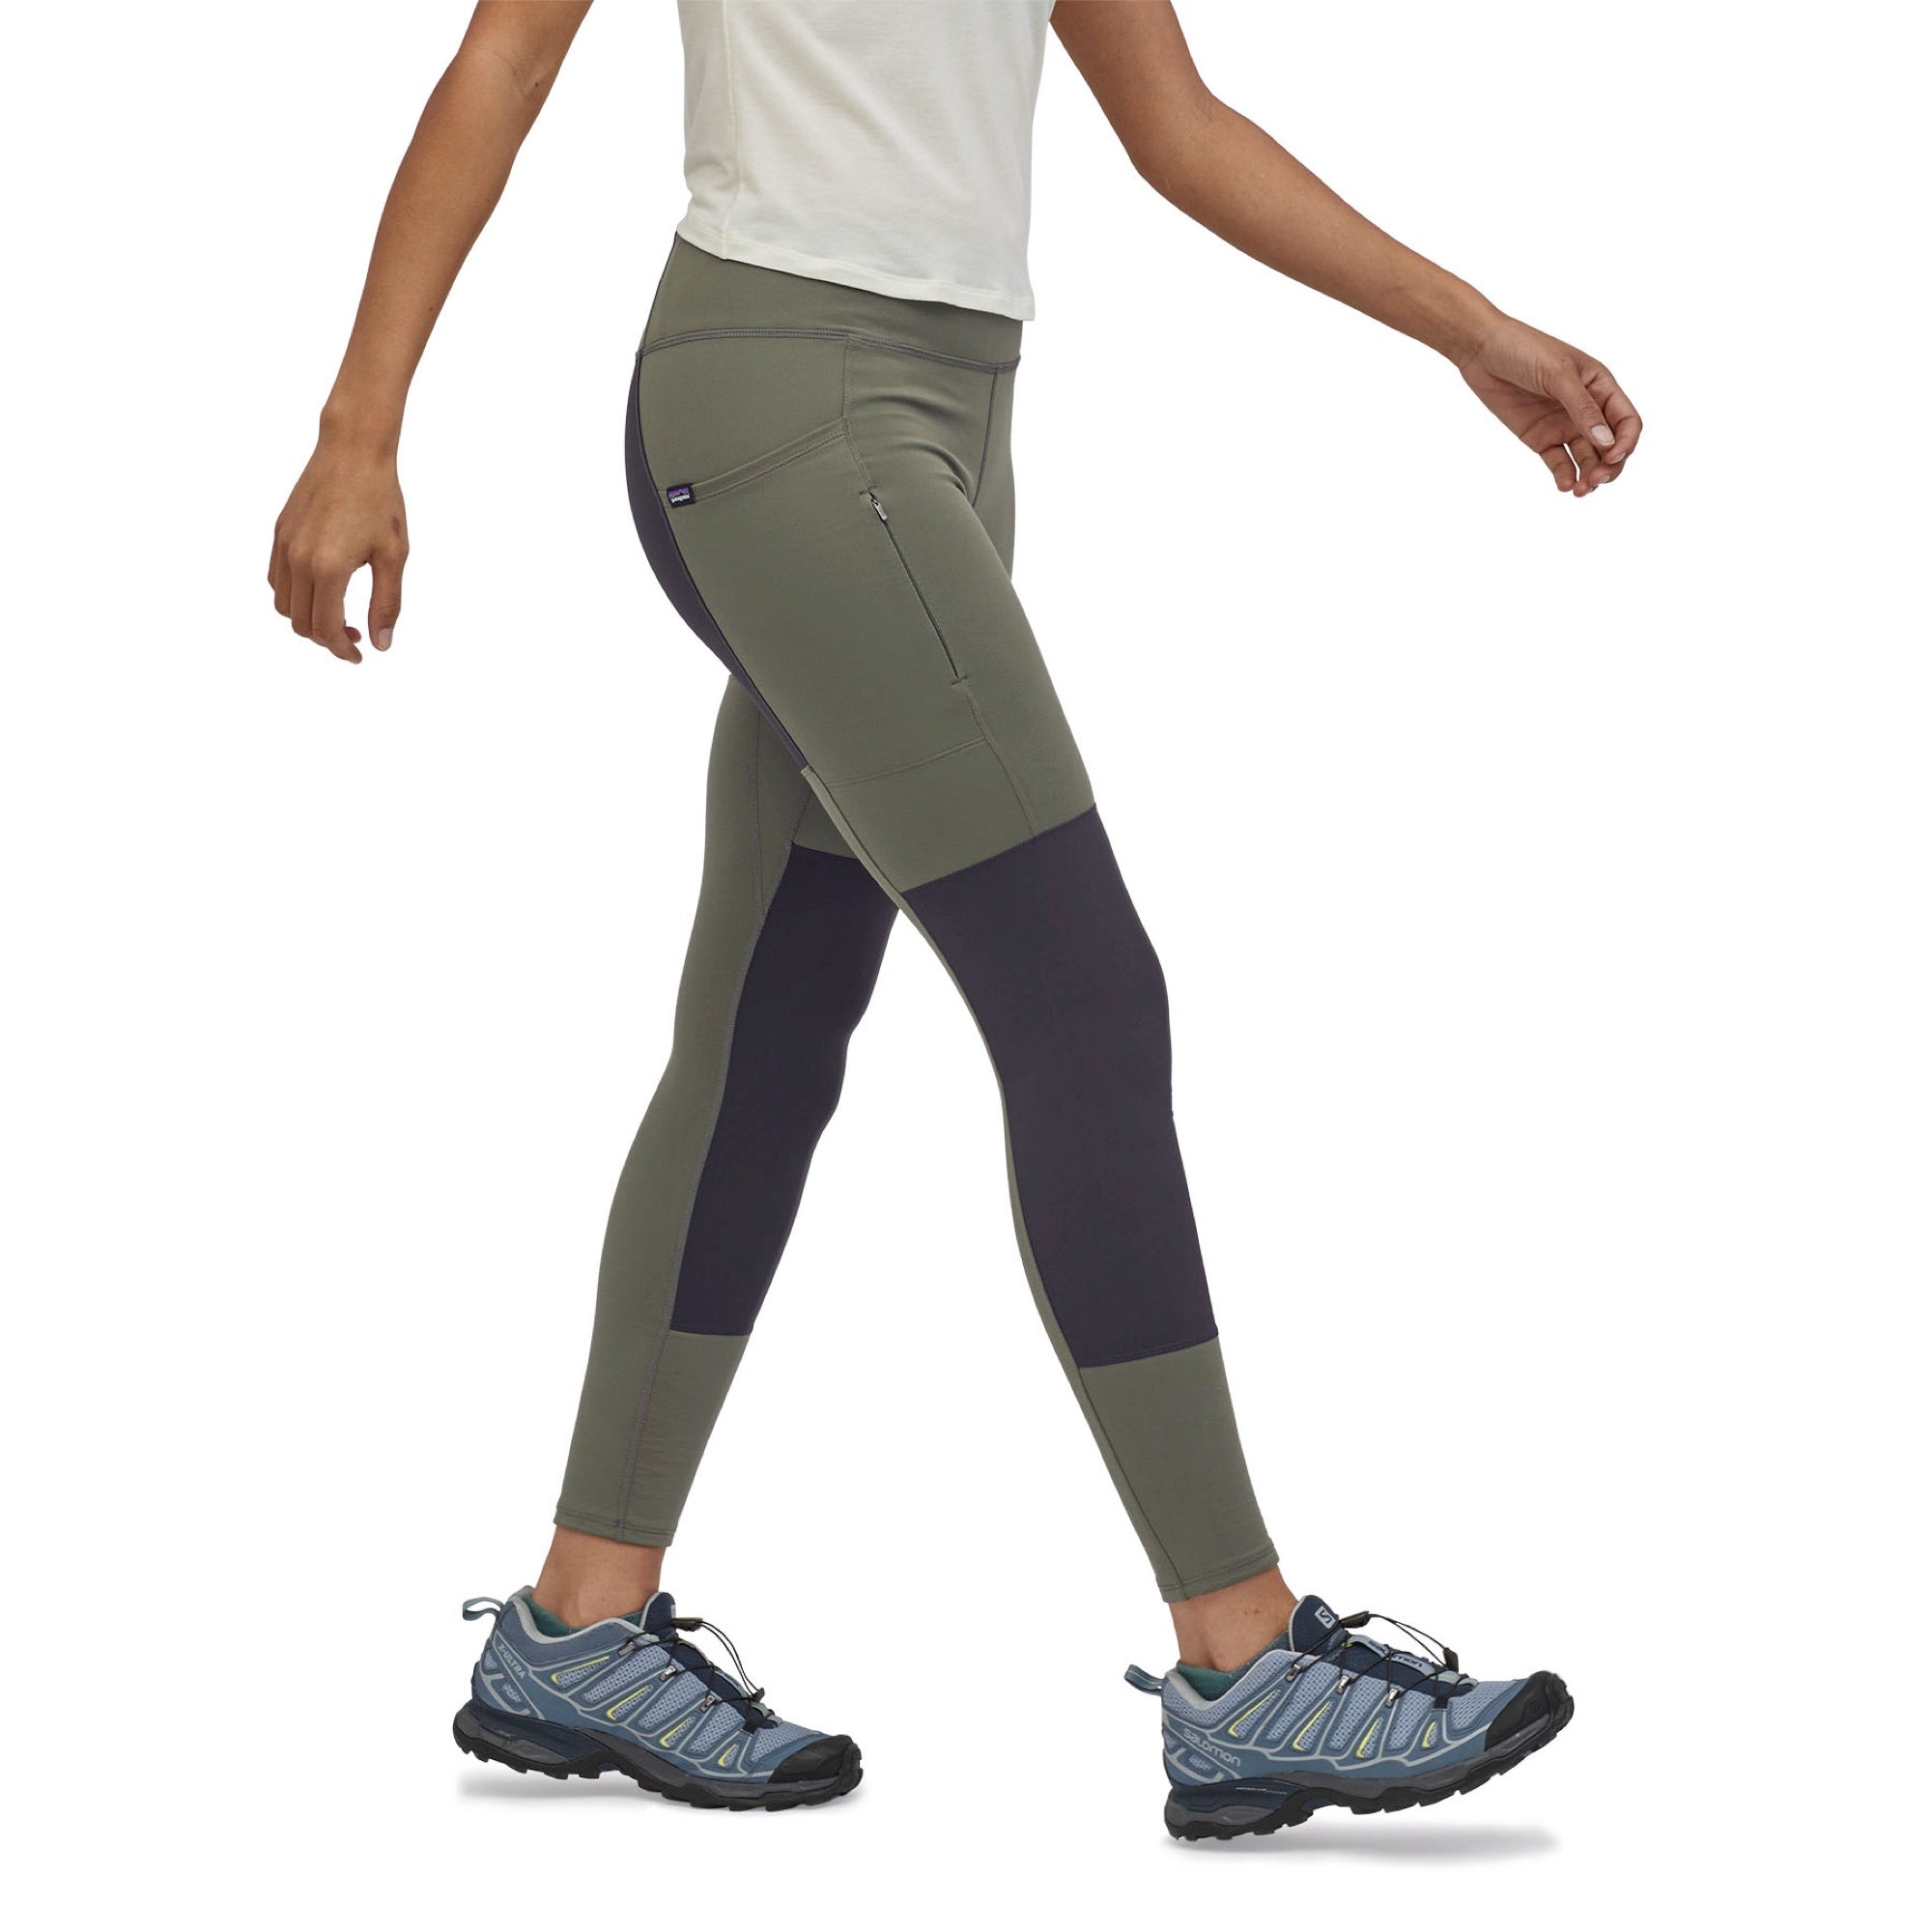 Women's Pack Out Hike Tights